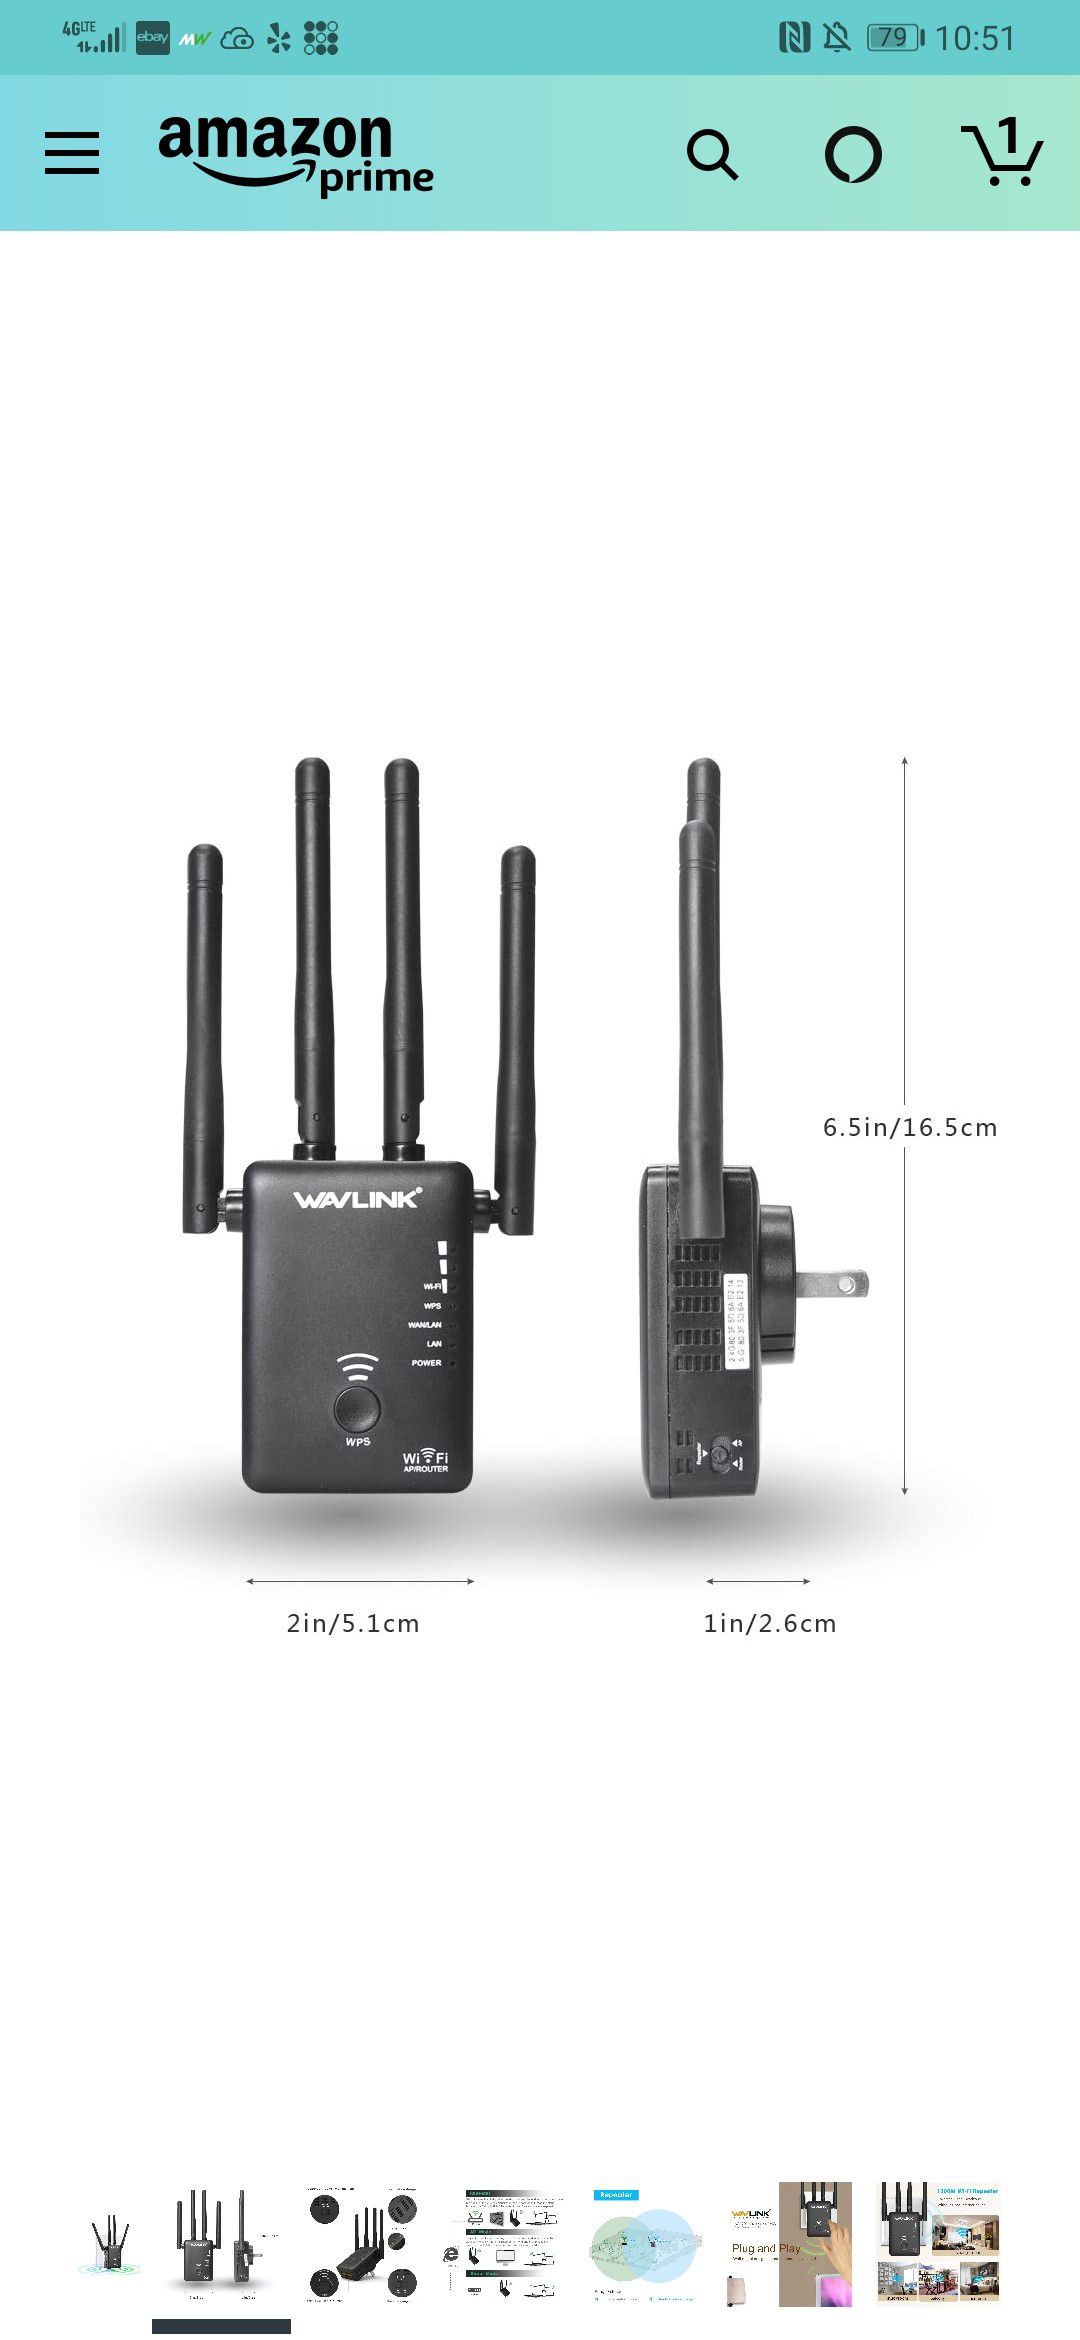 WAVLINK 1200M High Power WiFi Range Extender with Router Function,WiFi Booster 2.4G+5GHz WPS WiFi Repeater with 4 External Antennas